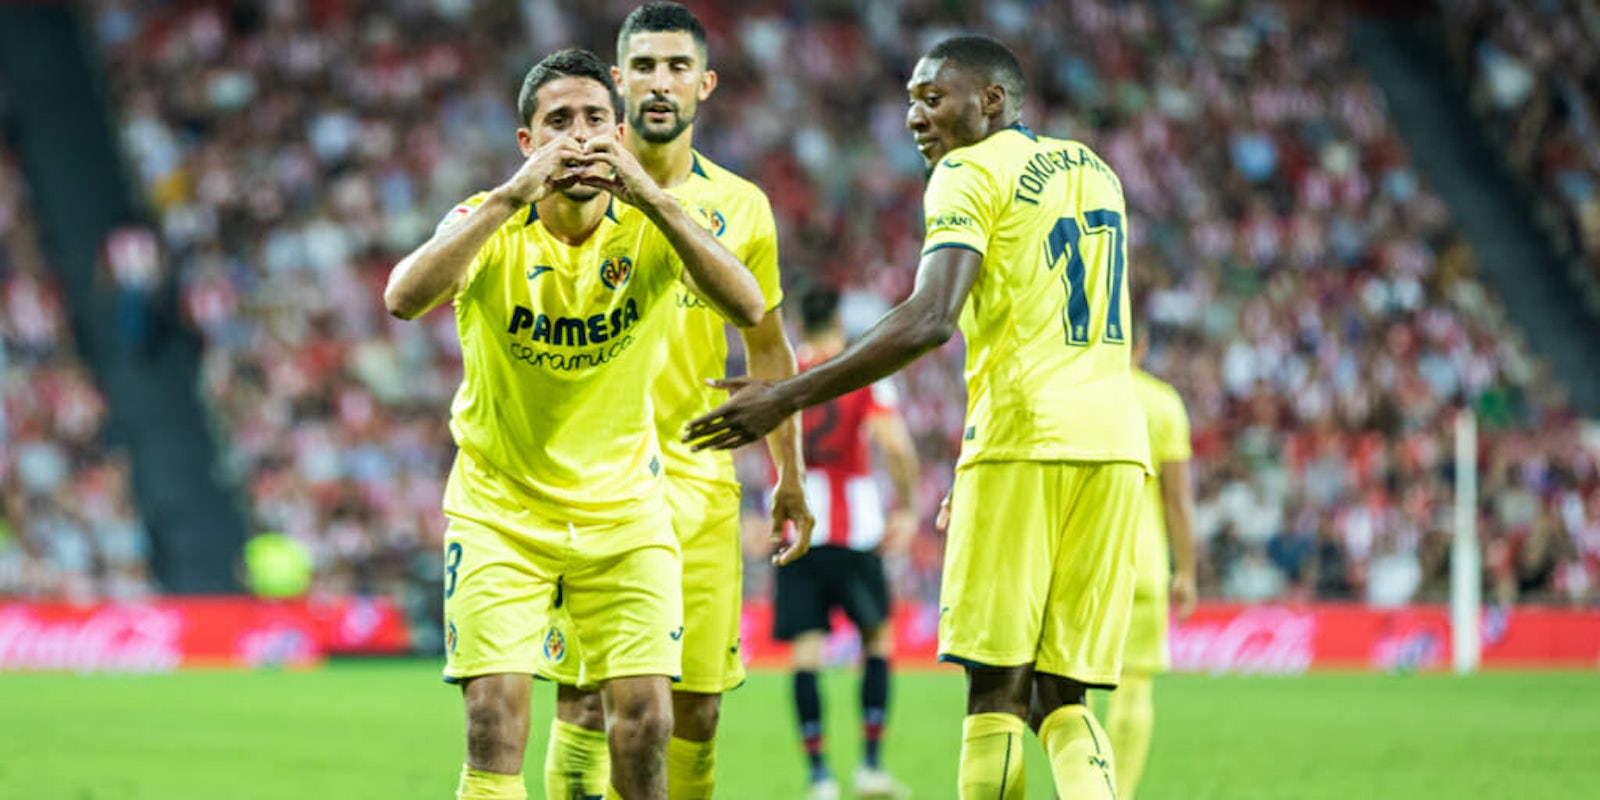 Villarreal vs. Real Betis live stream: How to watch online for free